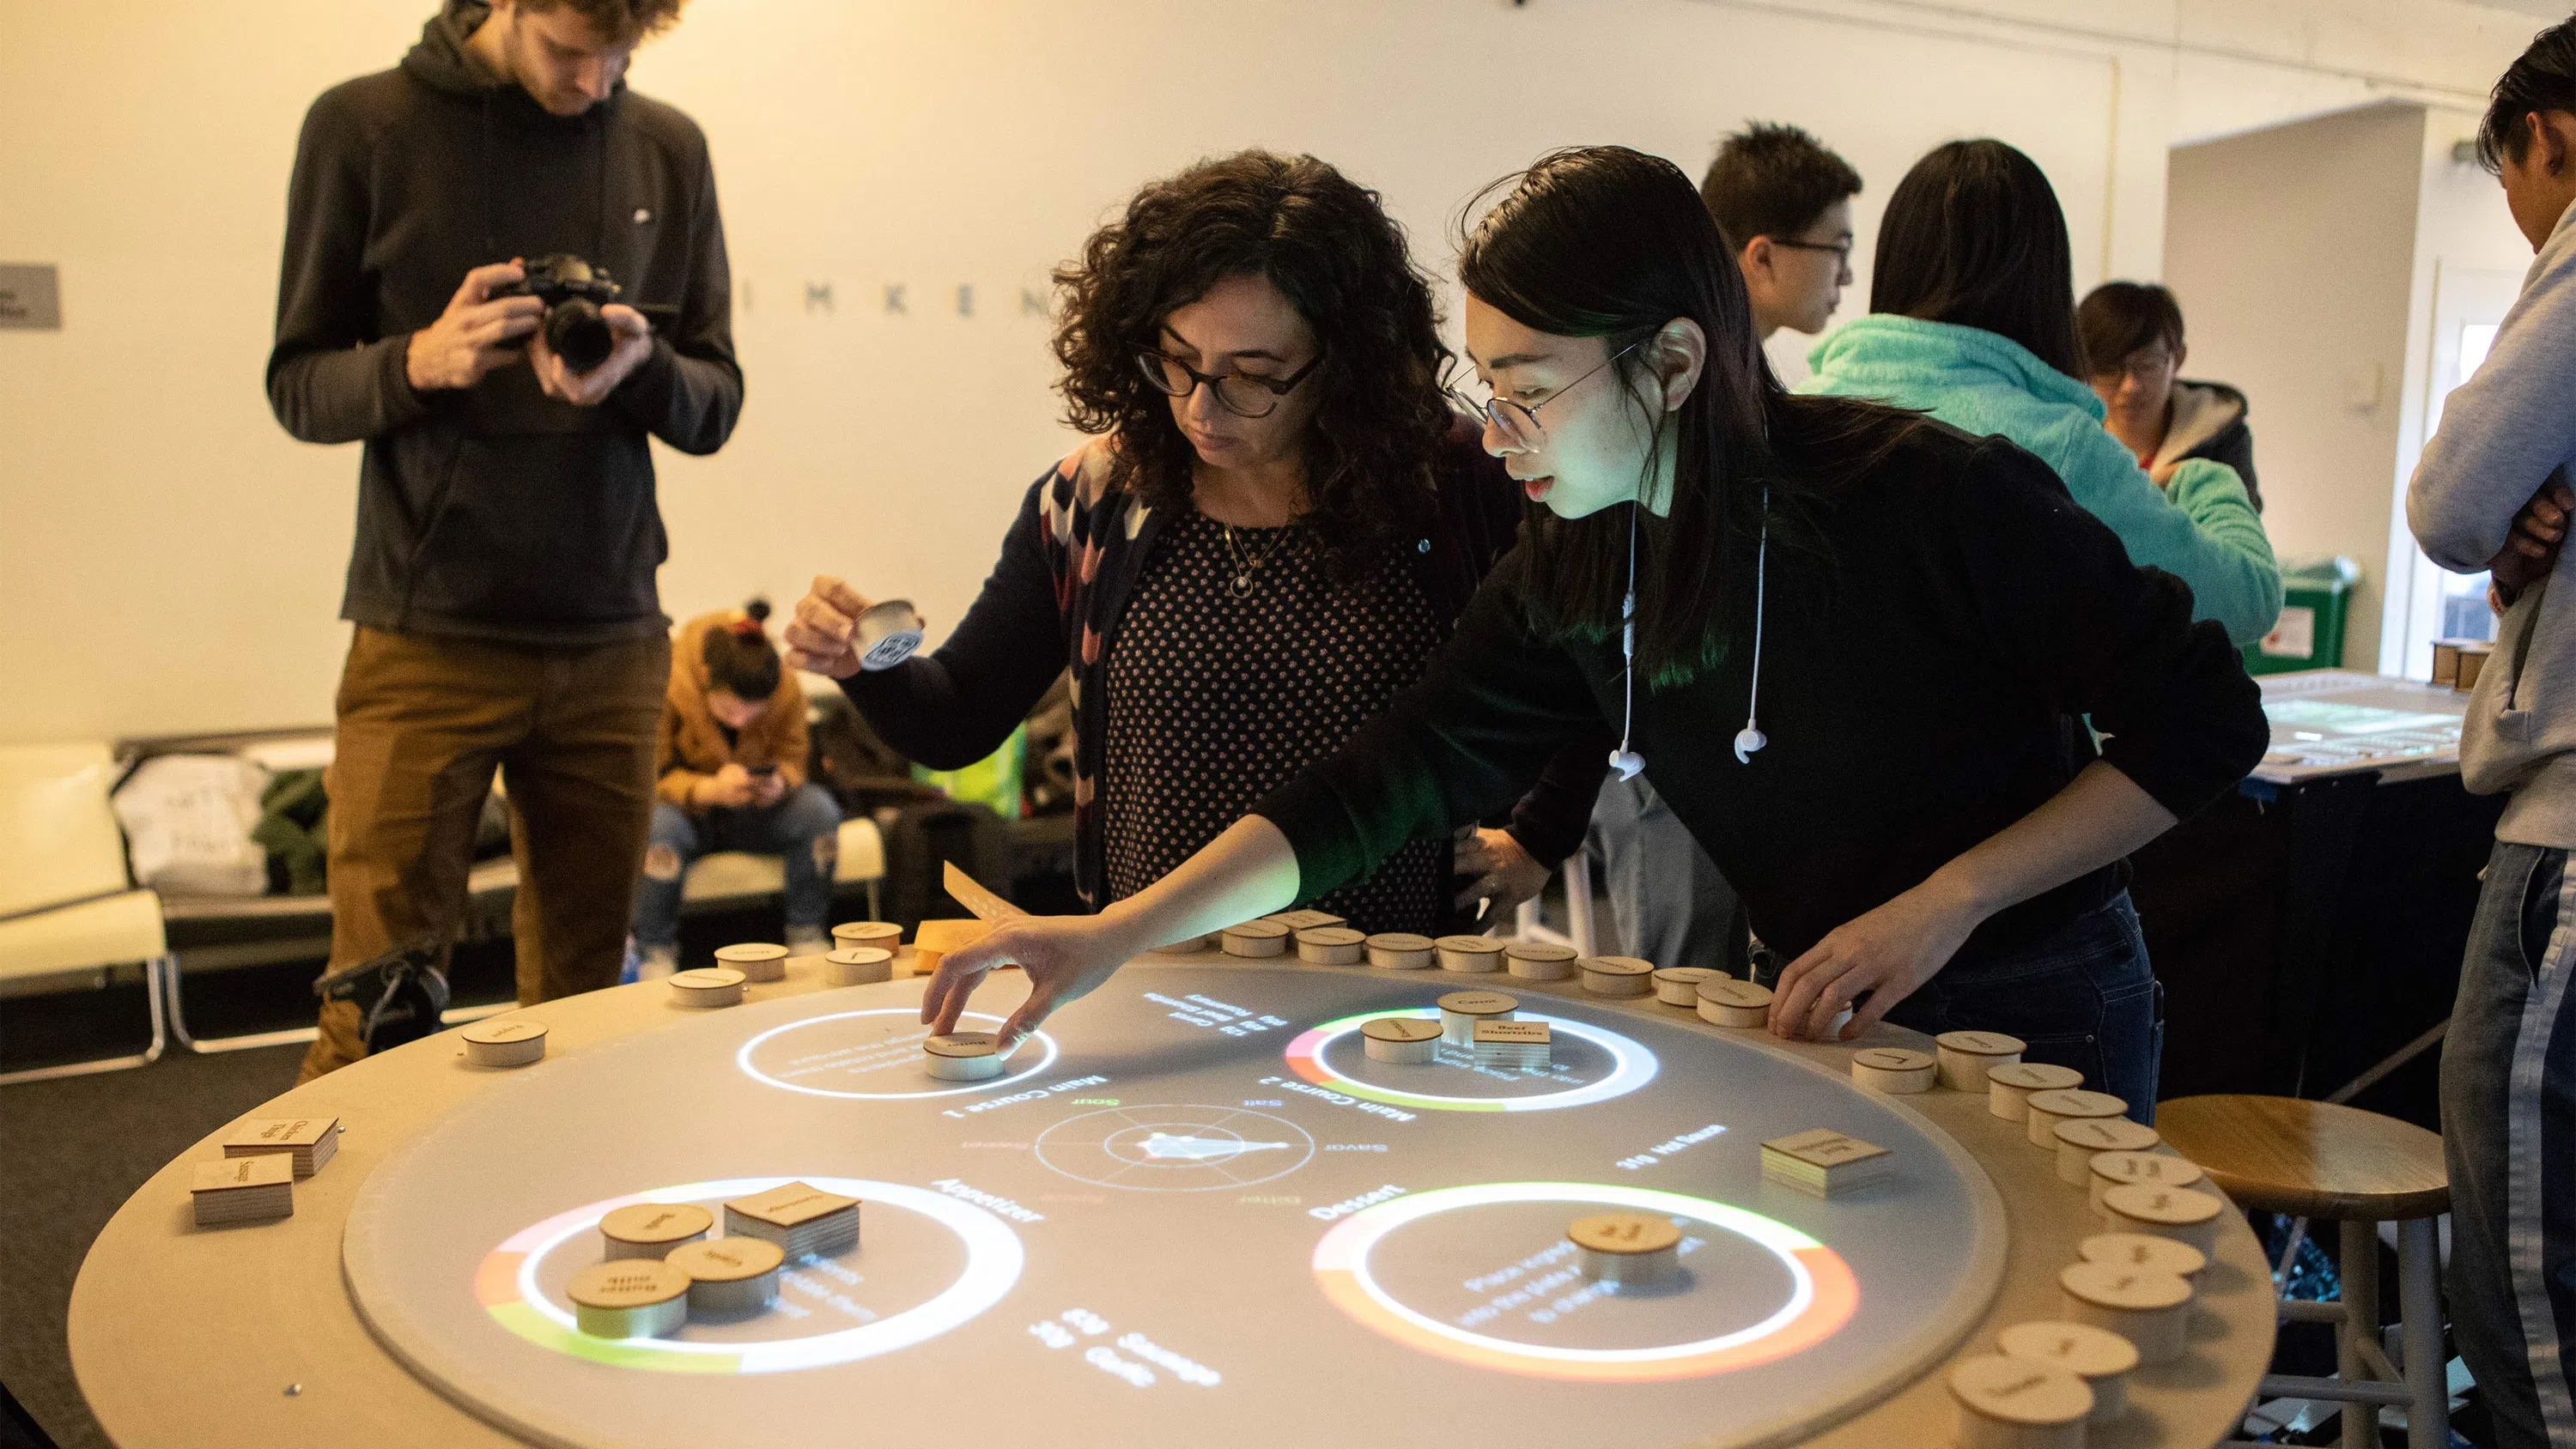 Dean Helen Maria and a student interact with wooden objects on a LED-lit table.